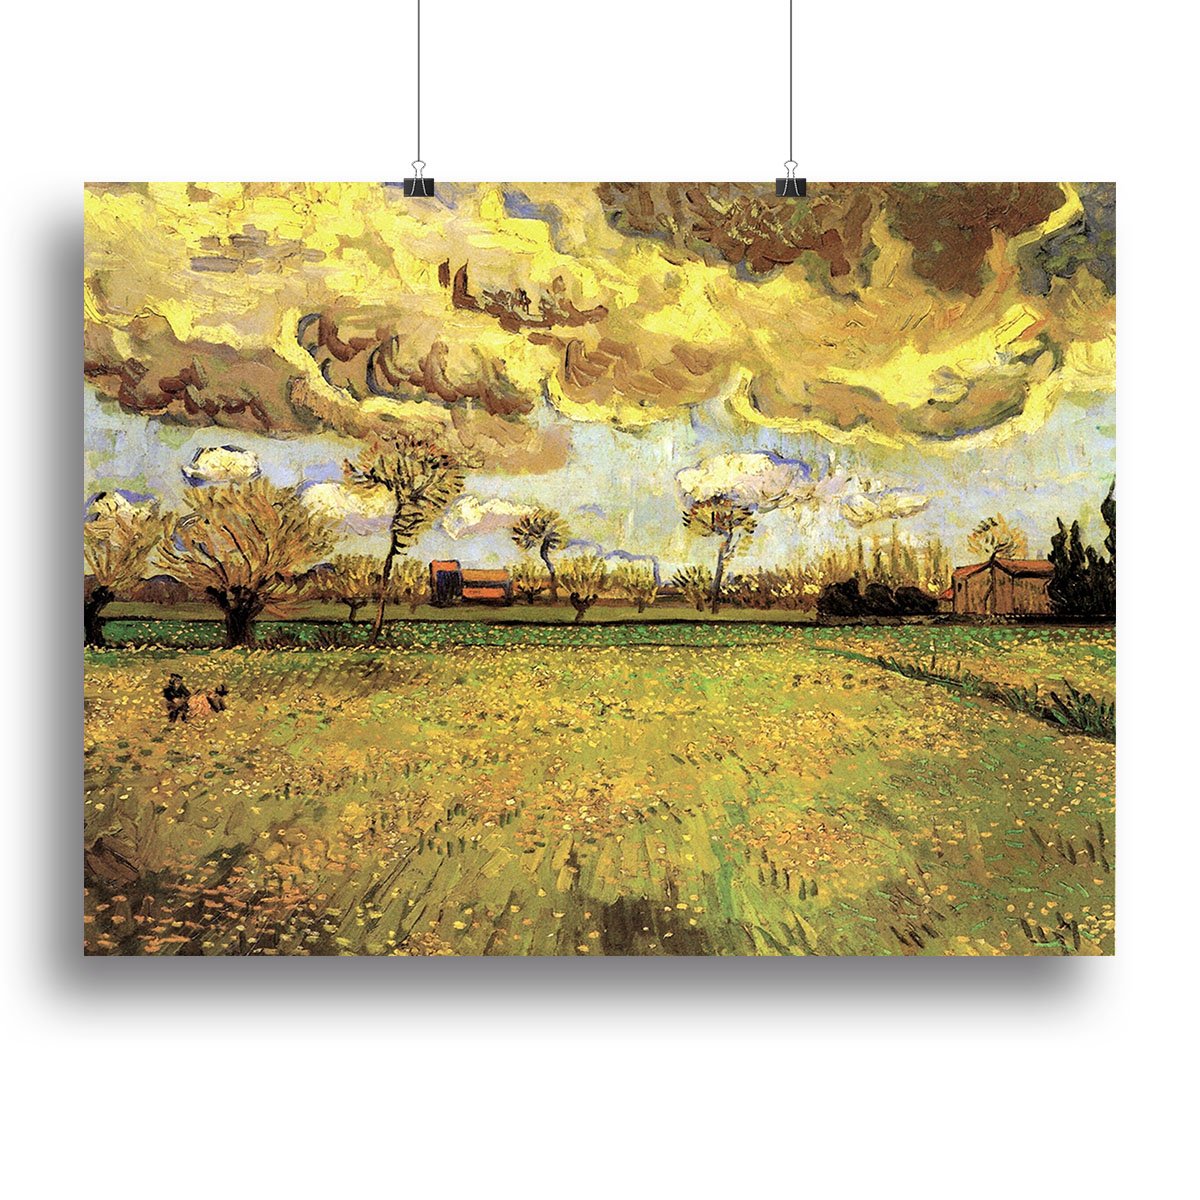 Landscape Under a Stormy Sky by Van Gogh Canvas Print or Poster